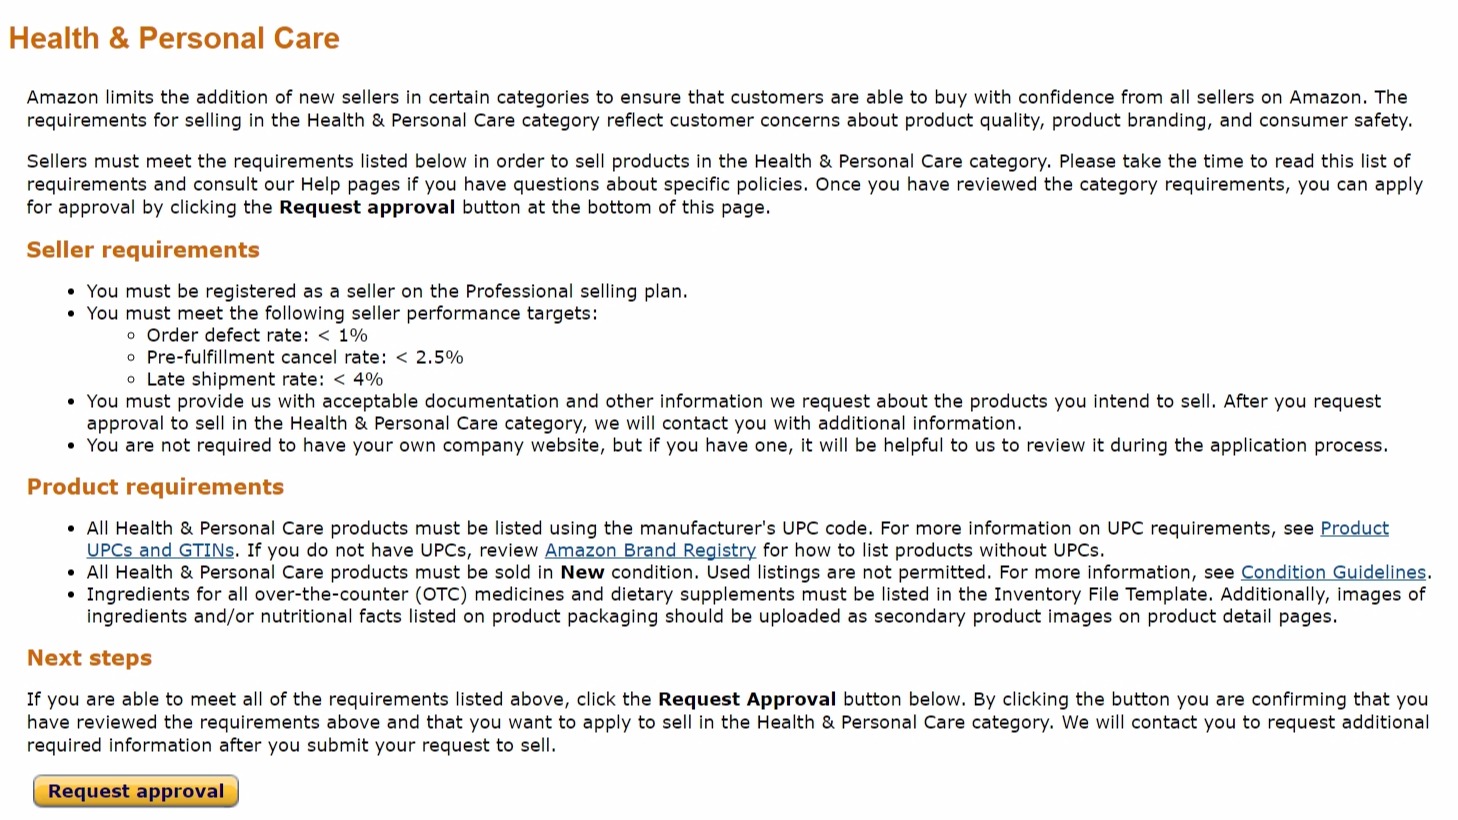 amazon health and personal care requirements